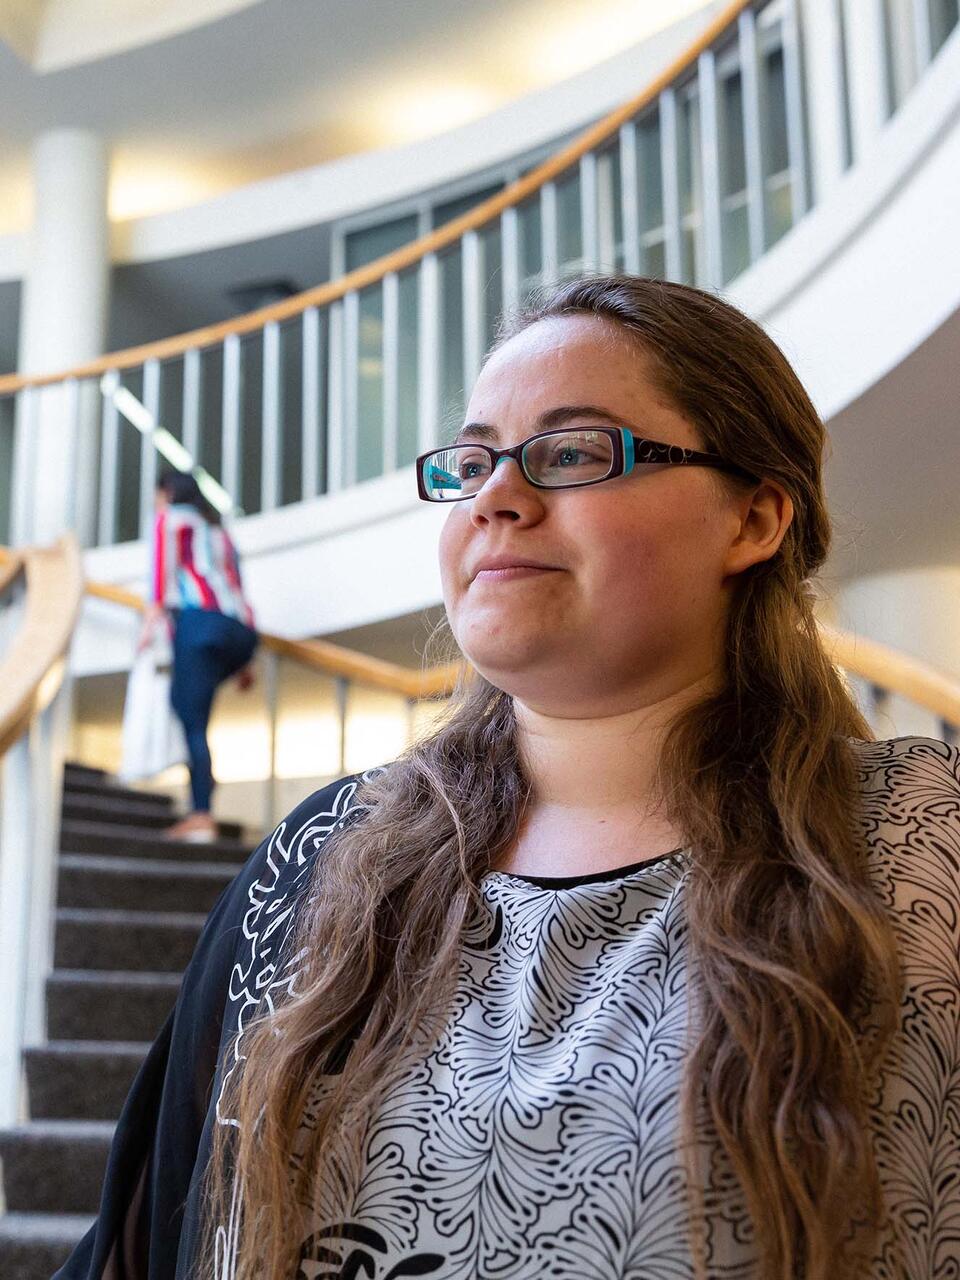 Student stands in the atrium lobby with stairs behind.